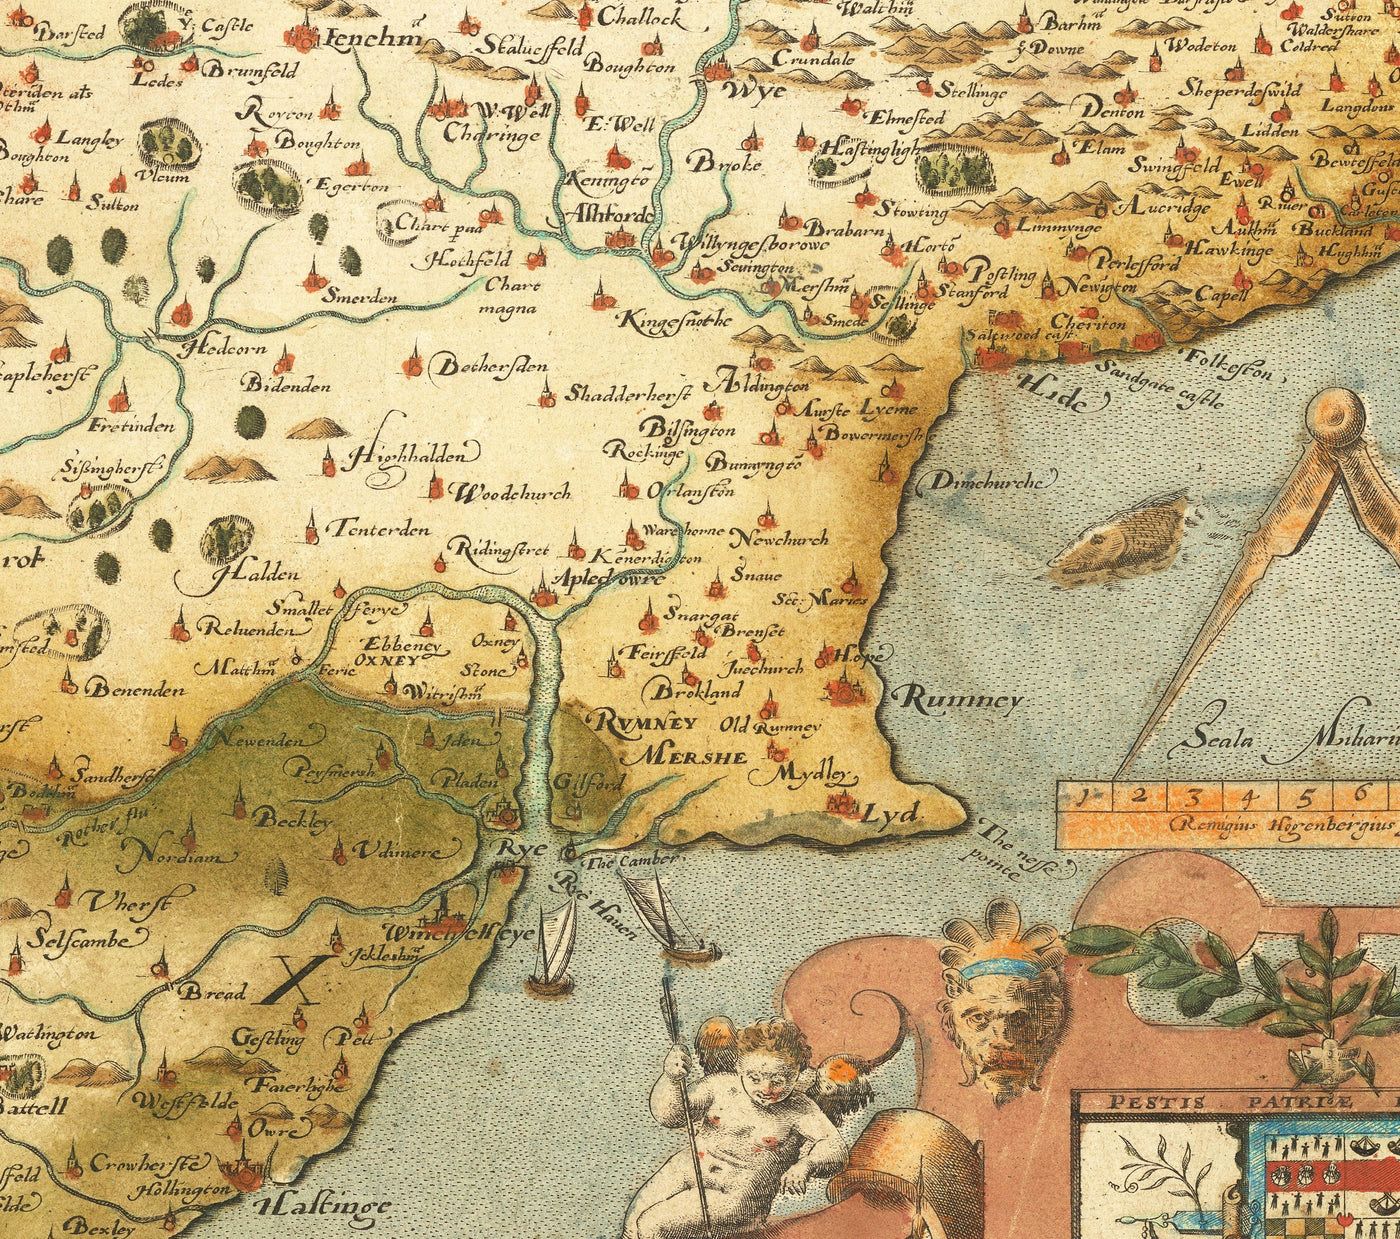 Old Map of Southeast England in 1575 by Saxton - Rare First Map of London, Kent, Sussex, Surrey, Middlesex